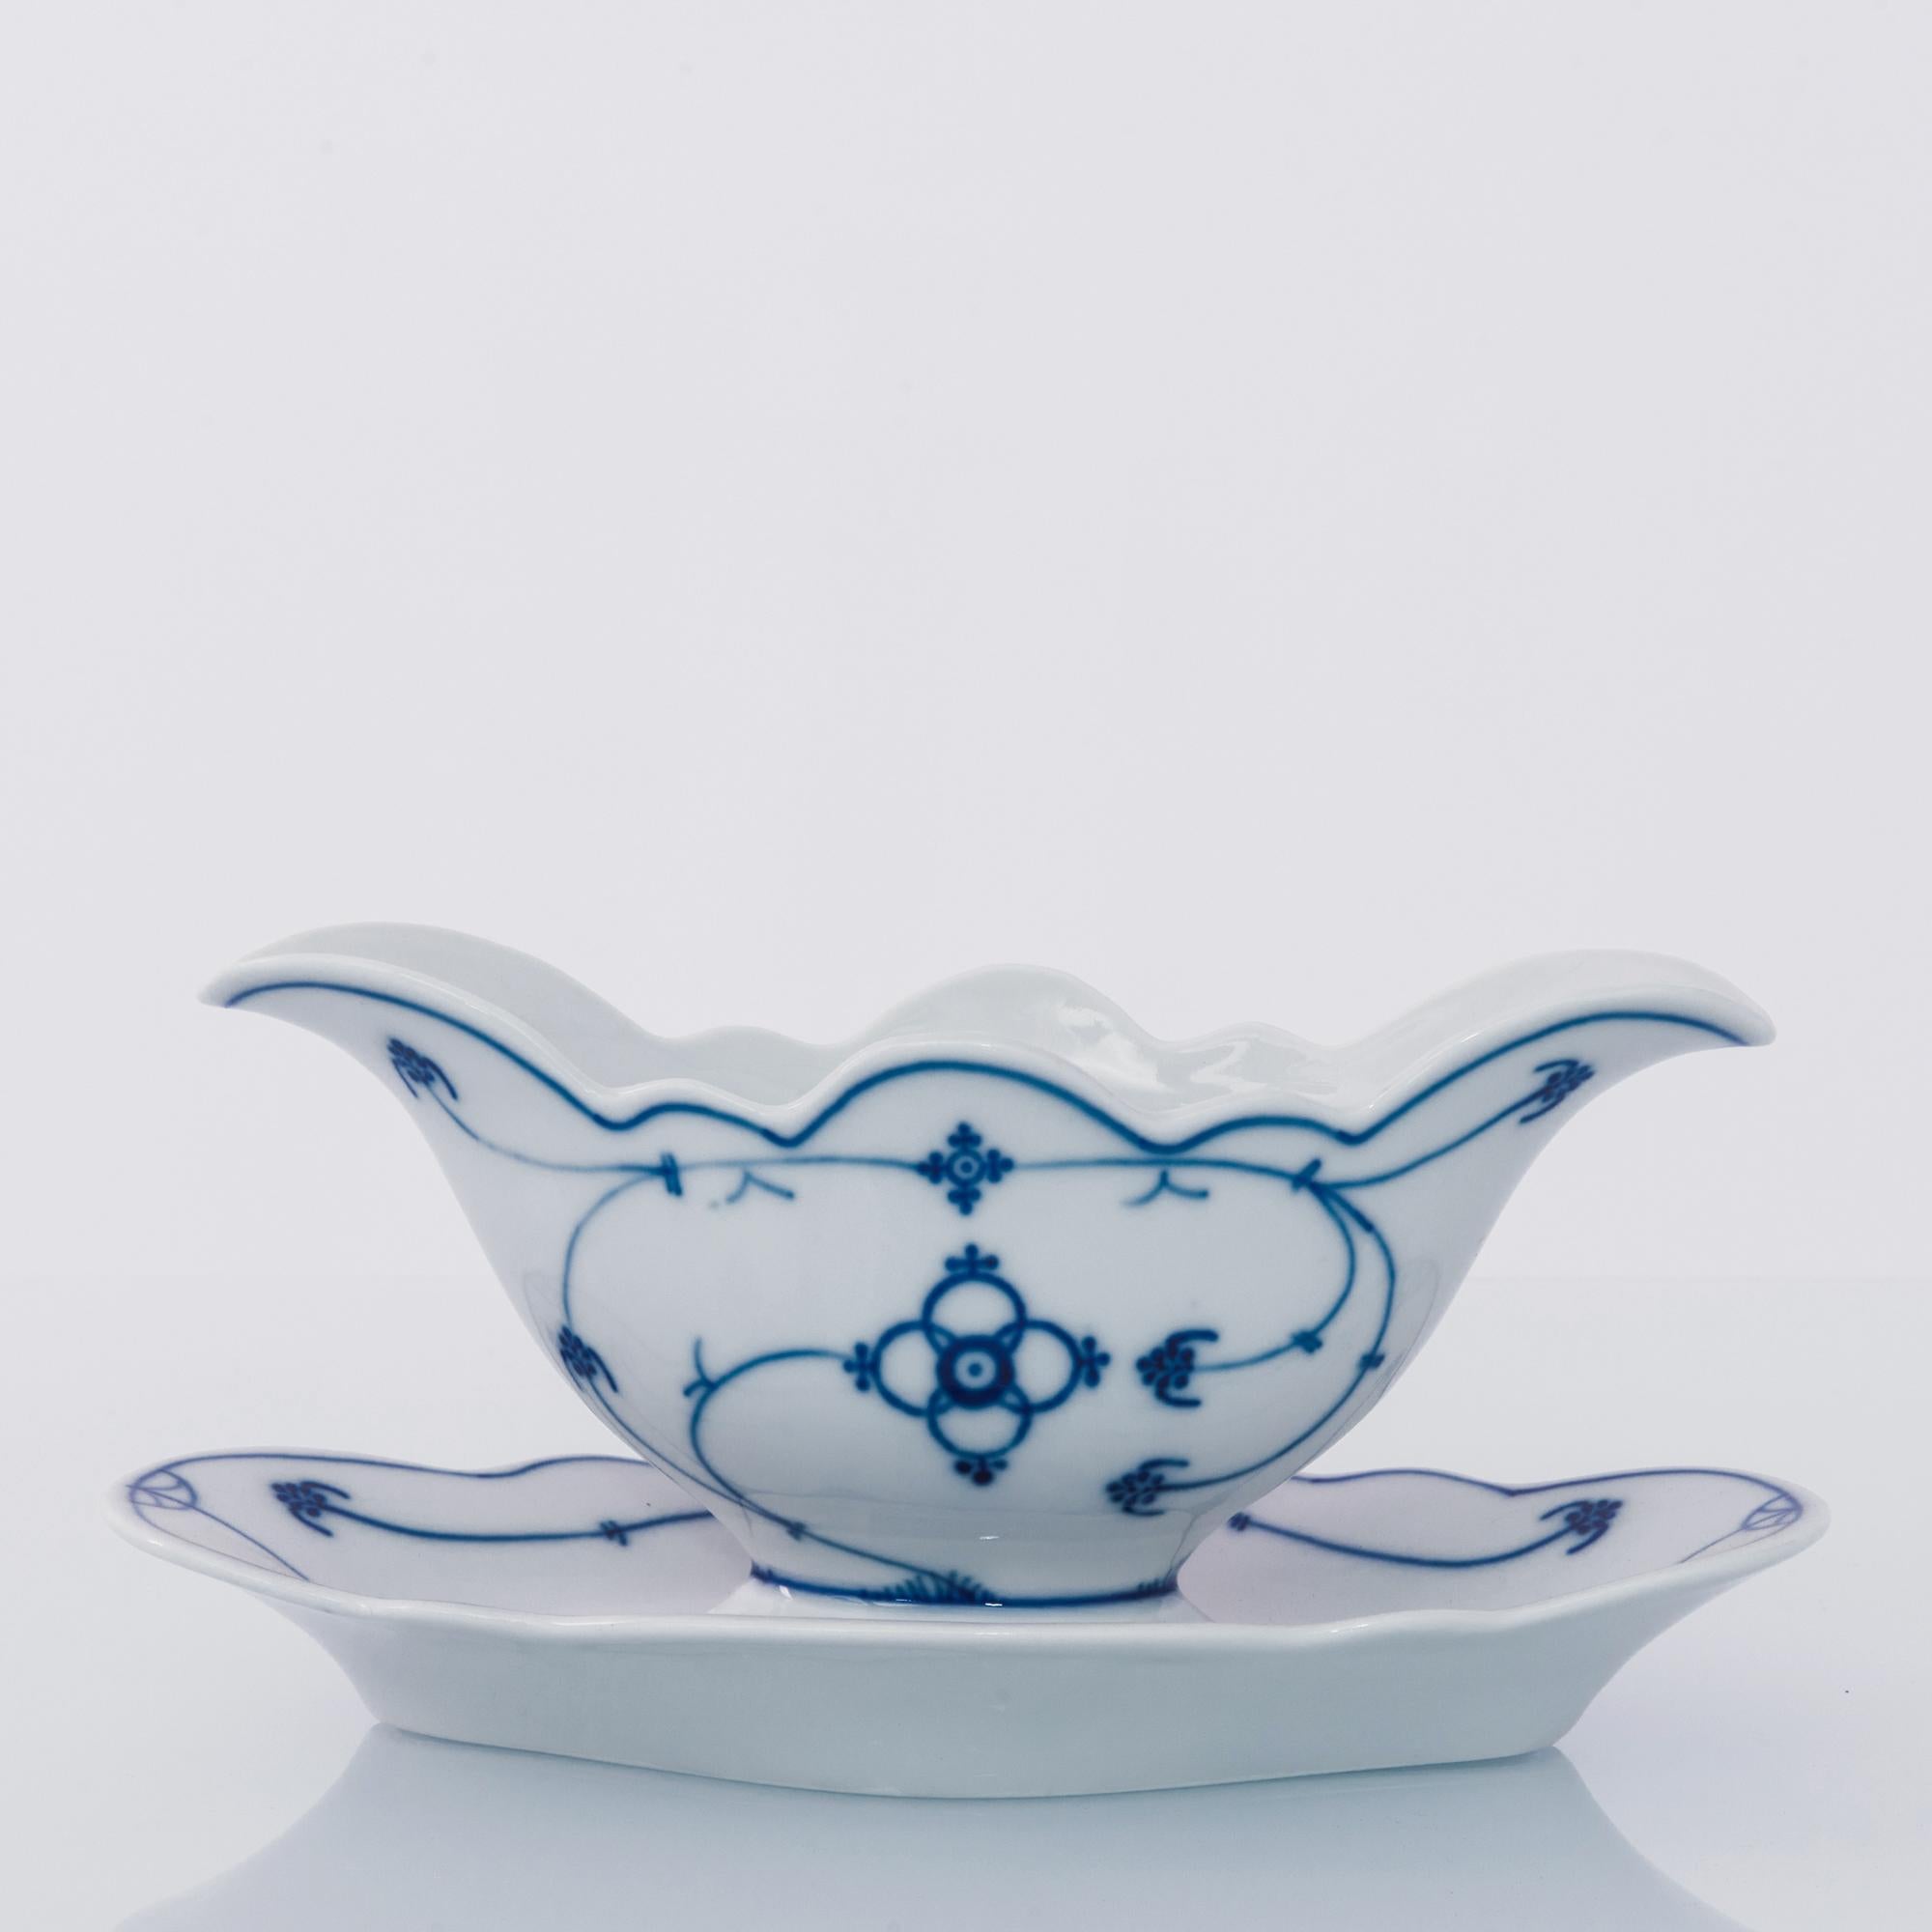 A ceramic sauceboat from the Netherlands, circa 1900. White china is decorated with an intricate pattern of slender stems and symmetrical buds. Laced with the signature Royal Copenhagen blue painted glaze; the delicate contour and out-turned lip of